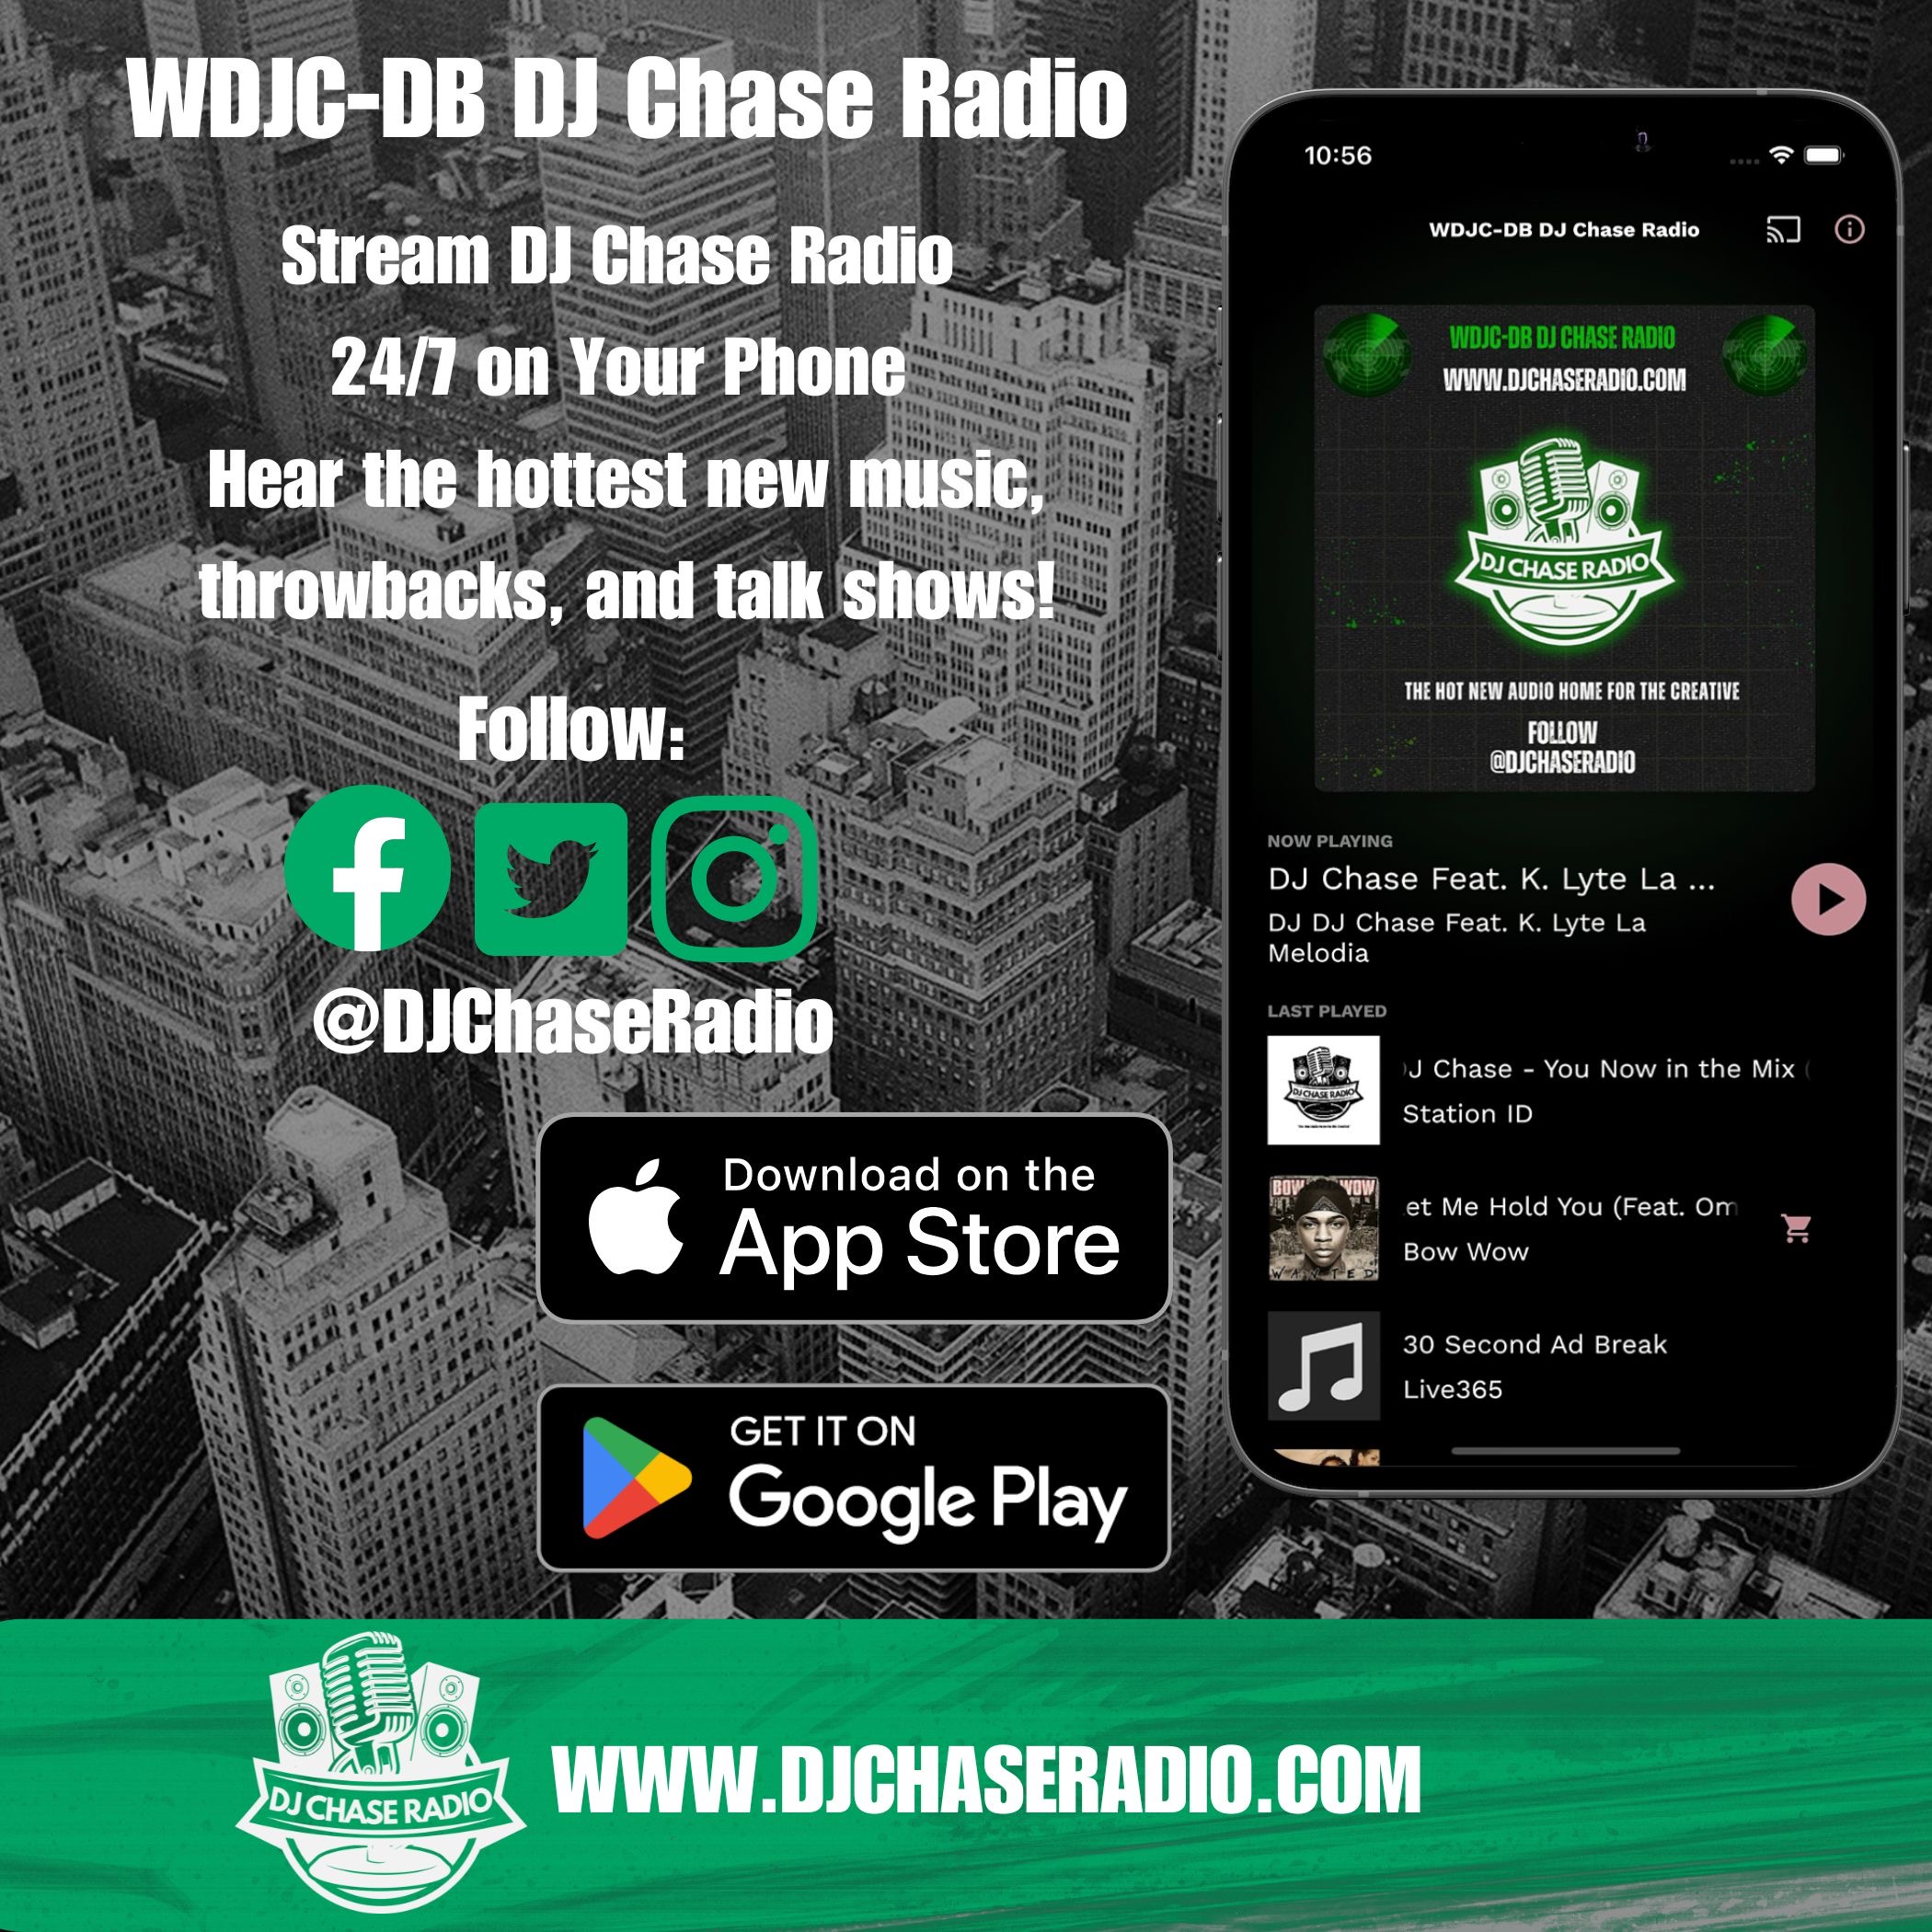 Art for It's Here Download the All New DJ Chase Radio App  by WDJC-DB DJ Chase Radio